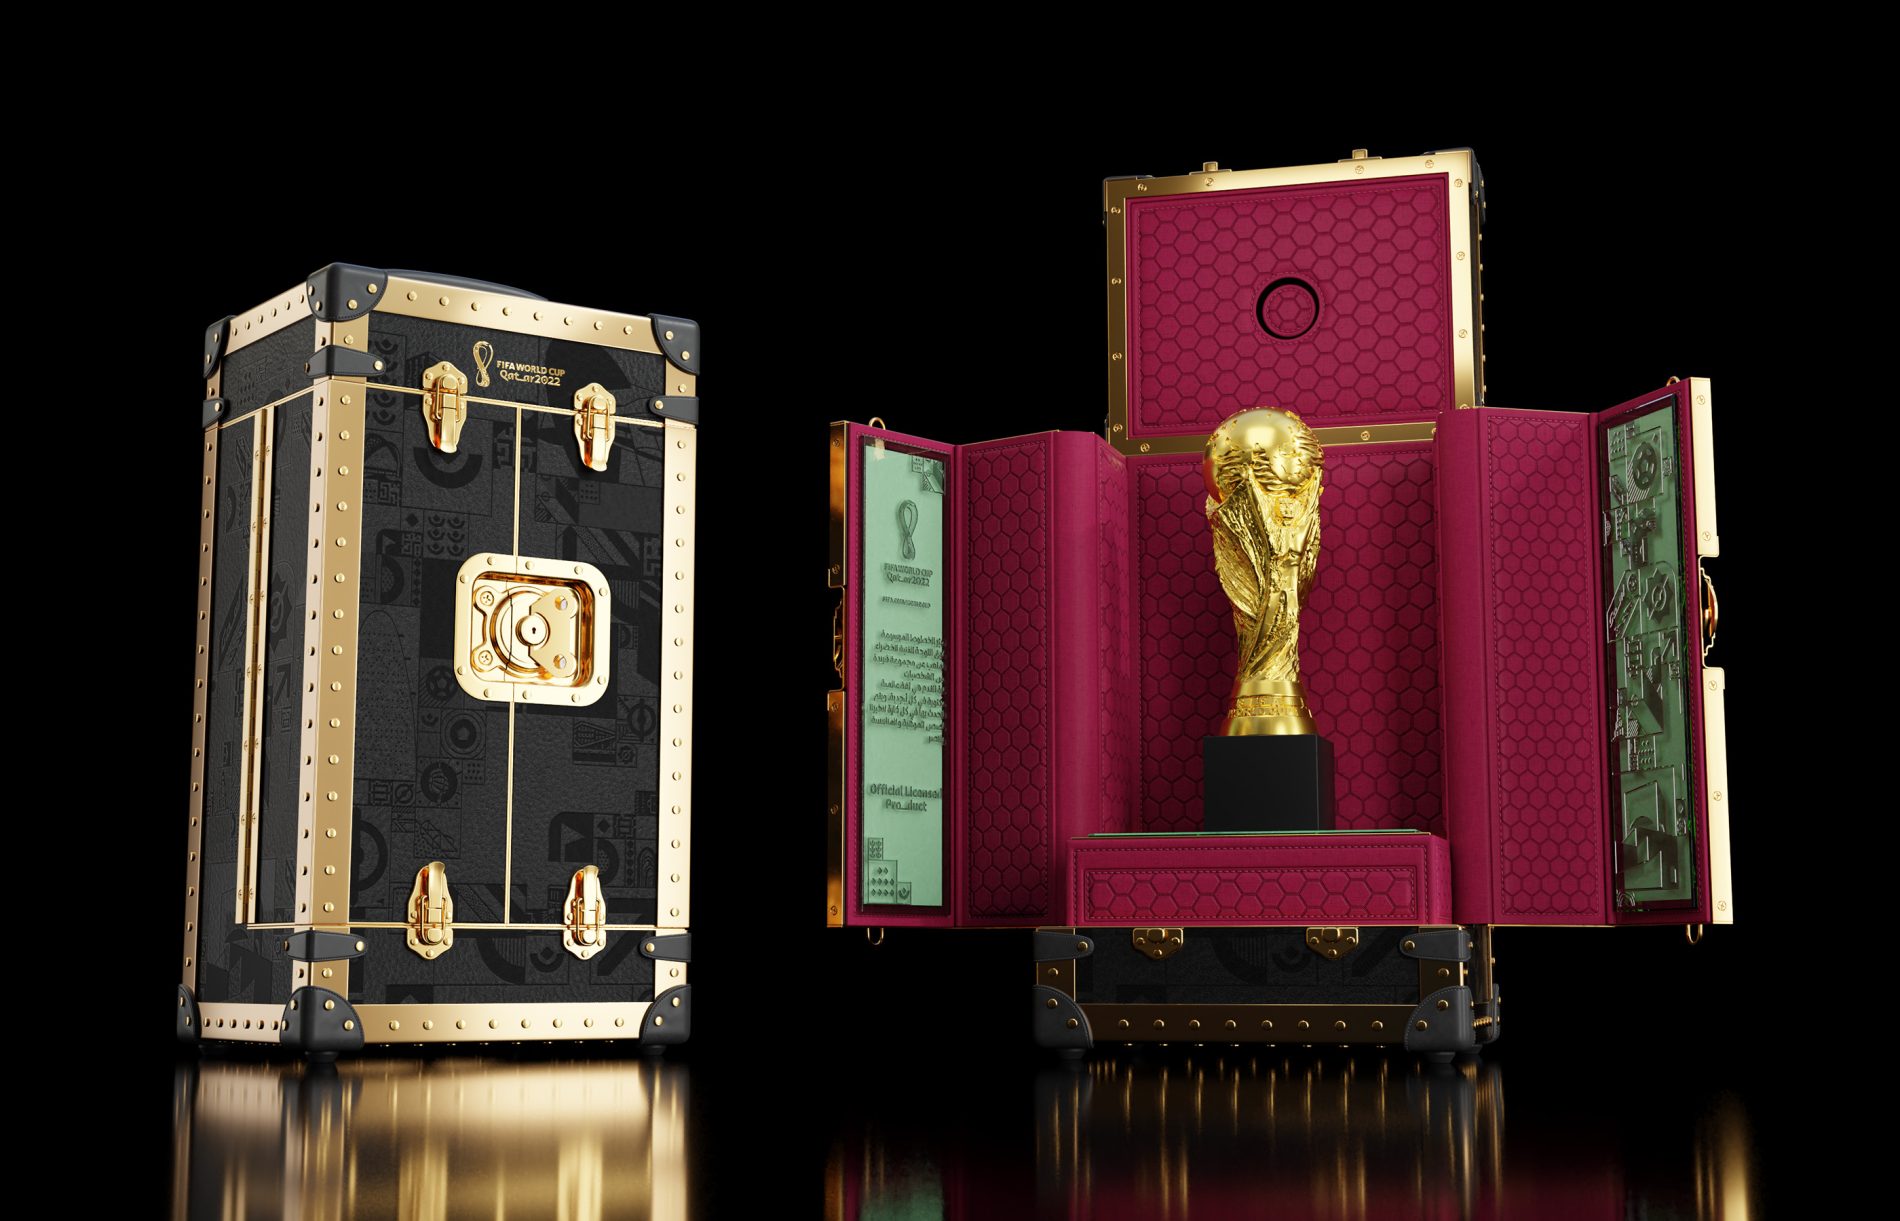 FIFA-World-Cup-trophy-case 